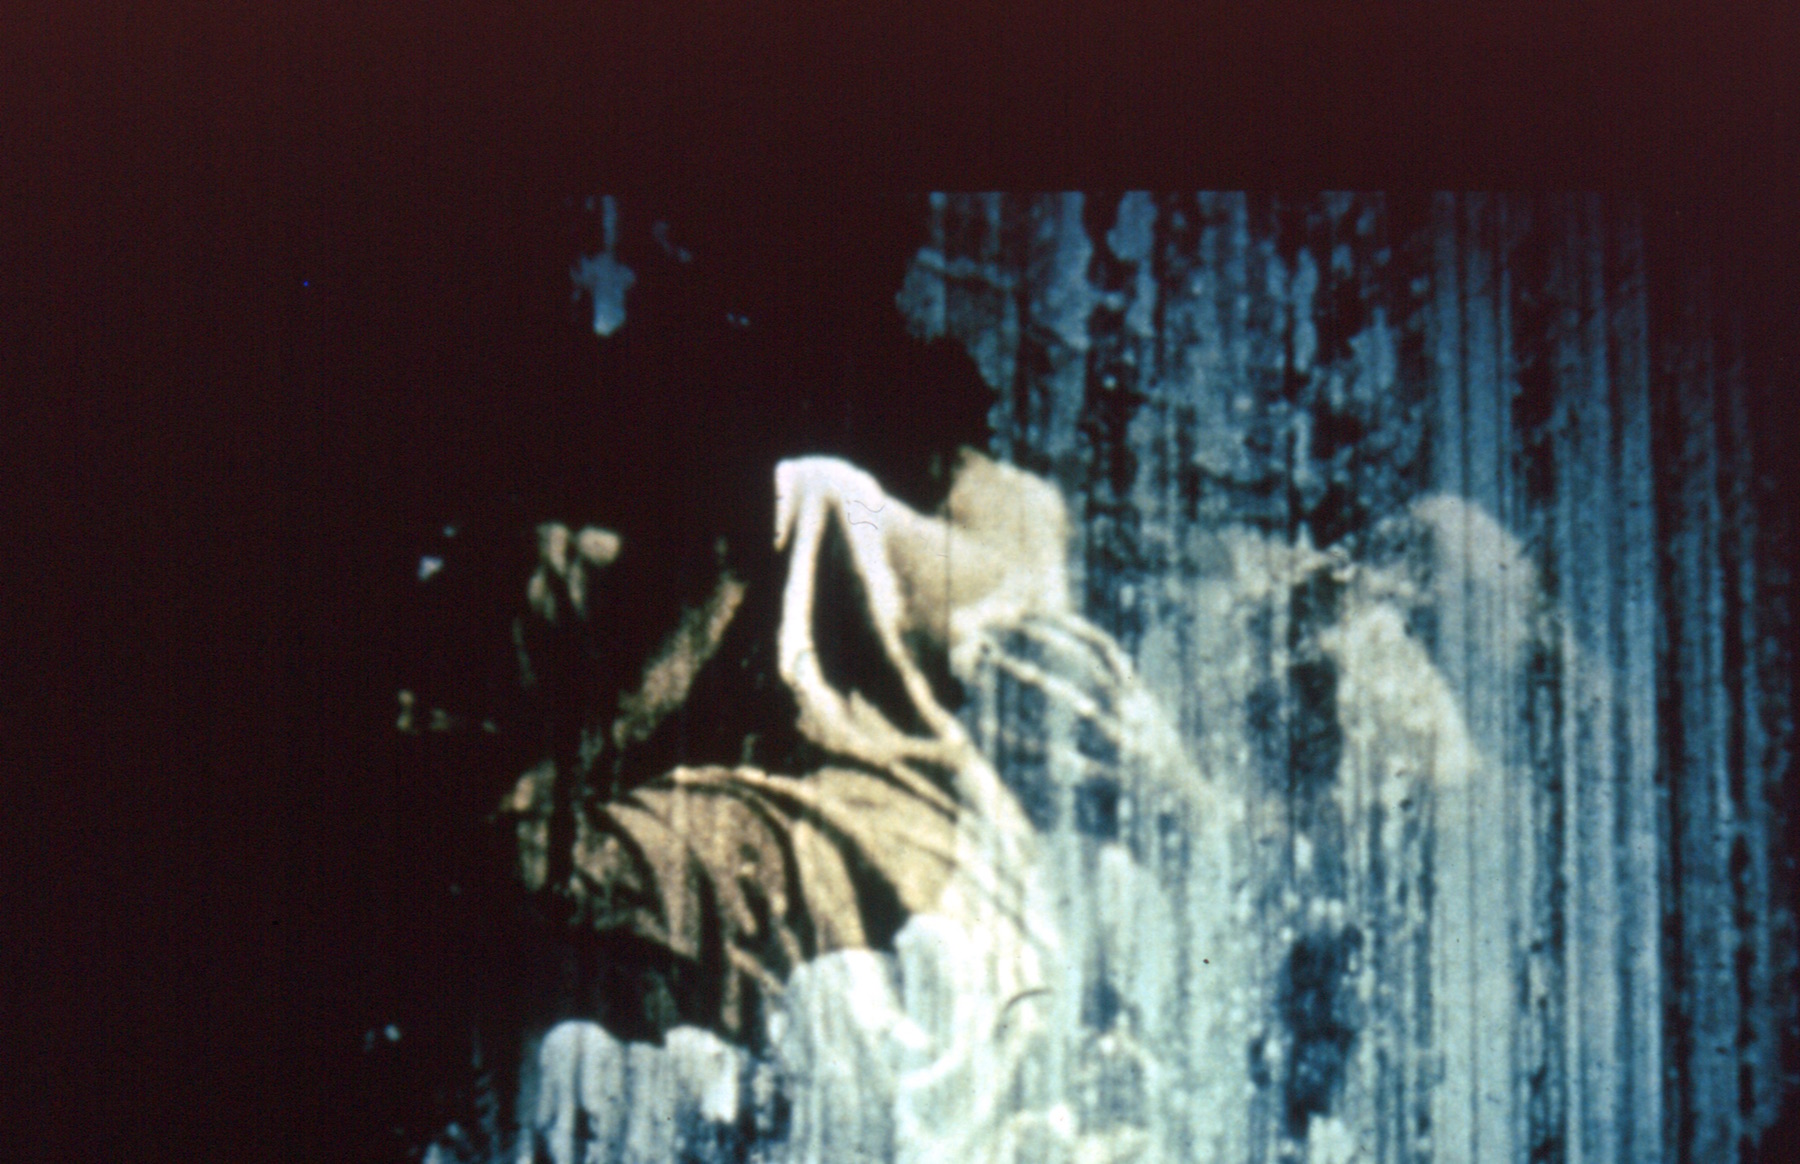 figures wrapped in fabric behind a blue, waterfall-like filter